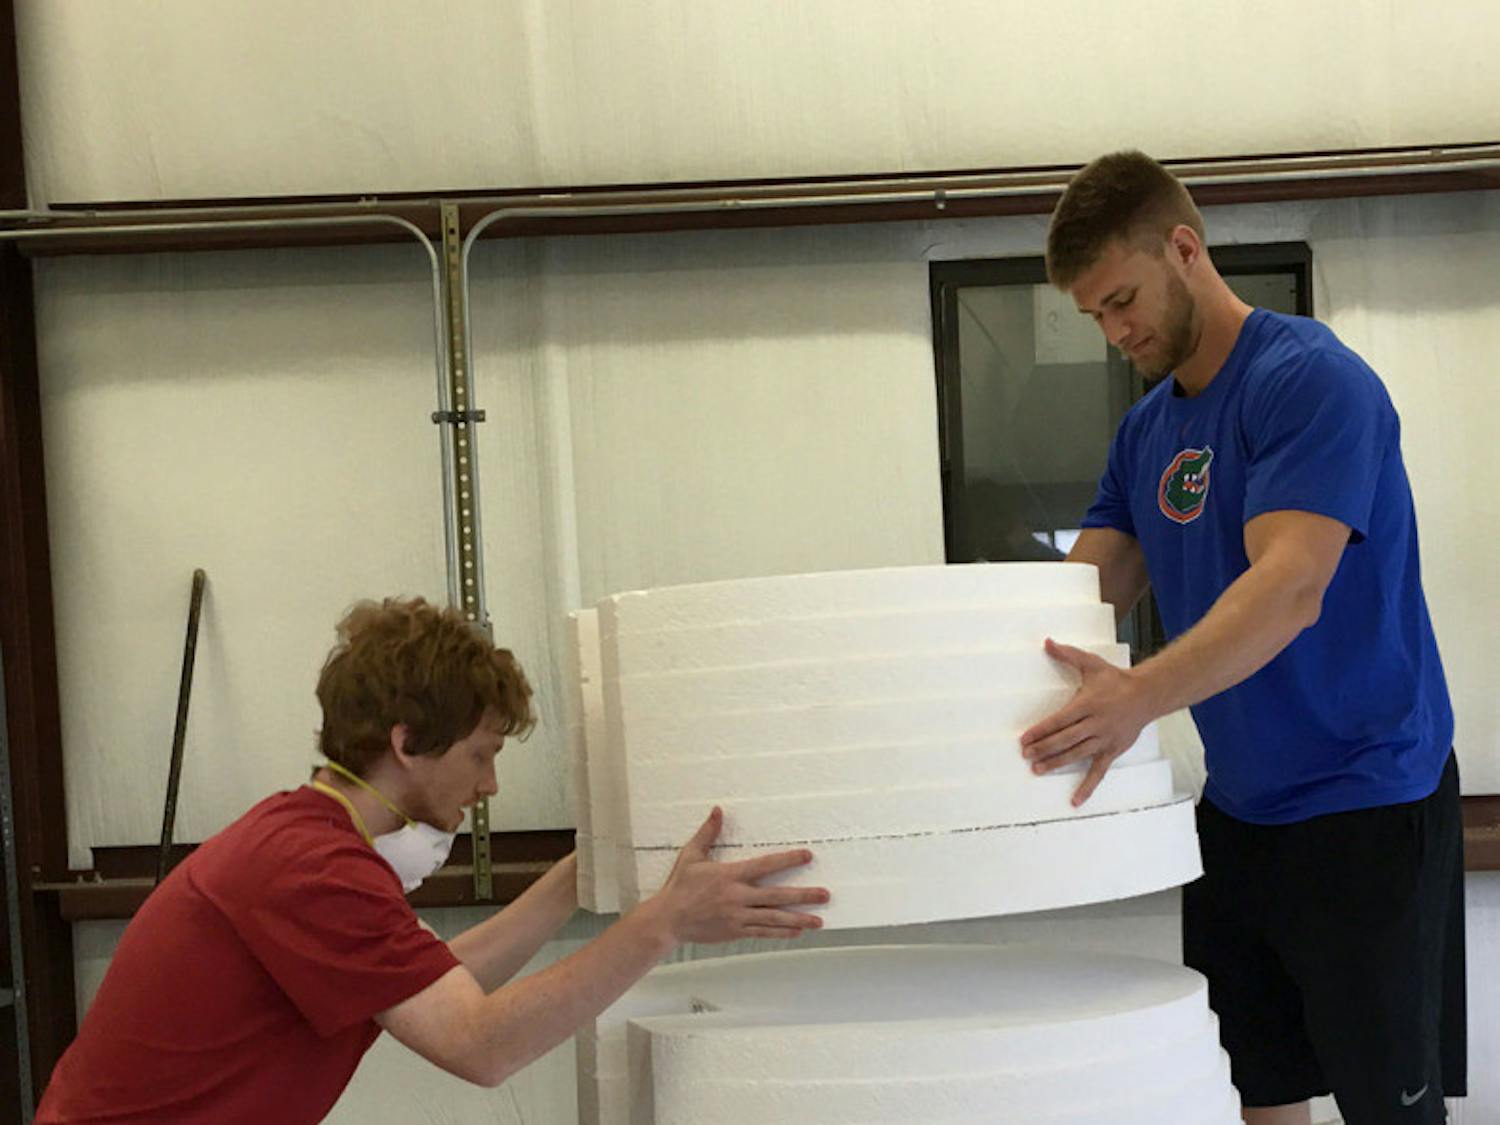 Captain and co-founder of Gatorloop Taylor Waber, left, and another member of the engineering club start to make the mold for the pod that will be put on a track this summer for SpaceX’s Hyperloop competition.